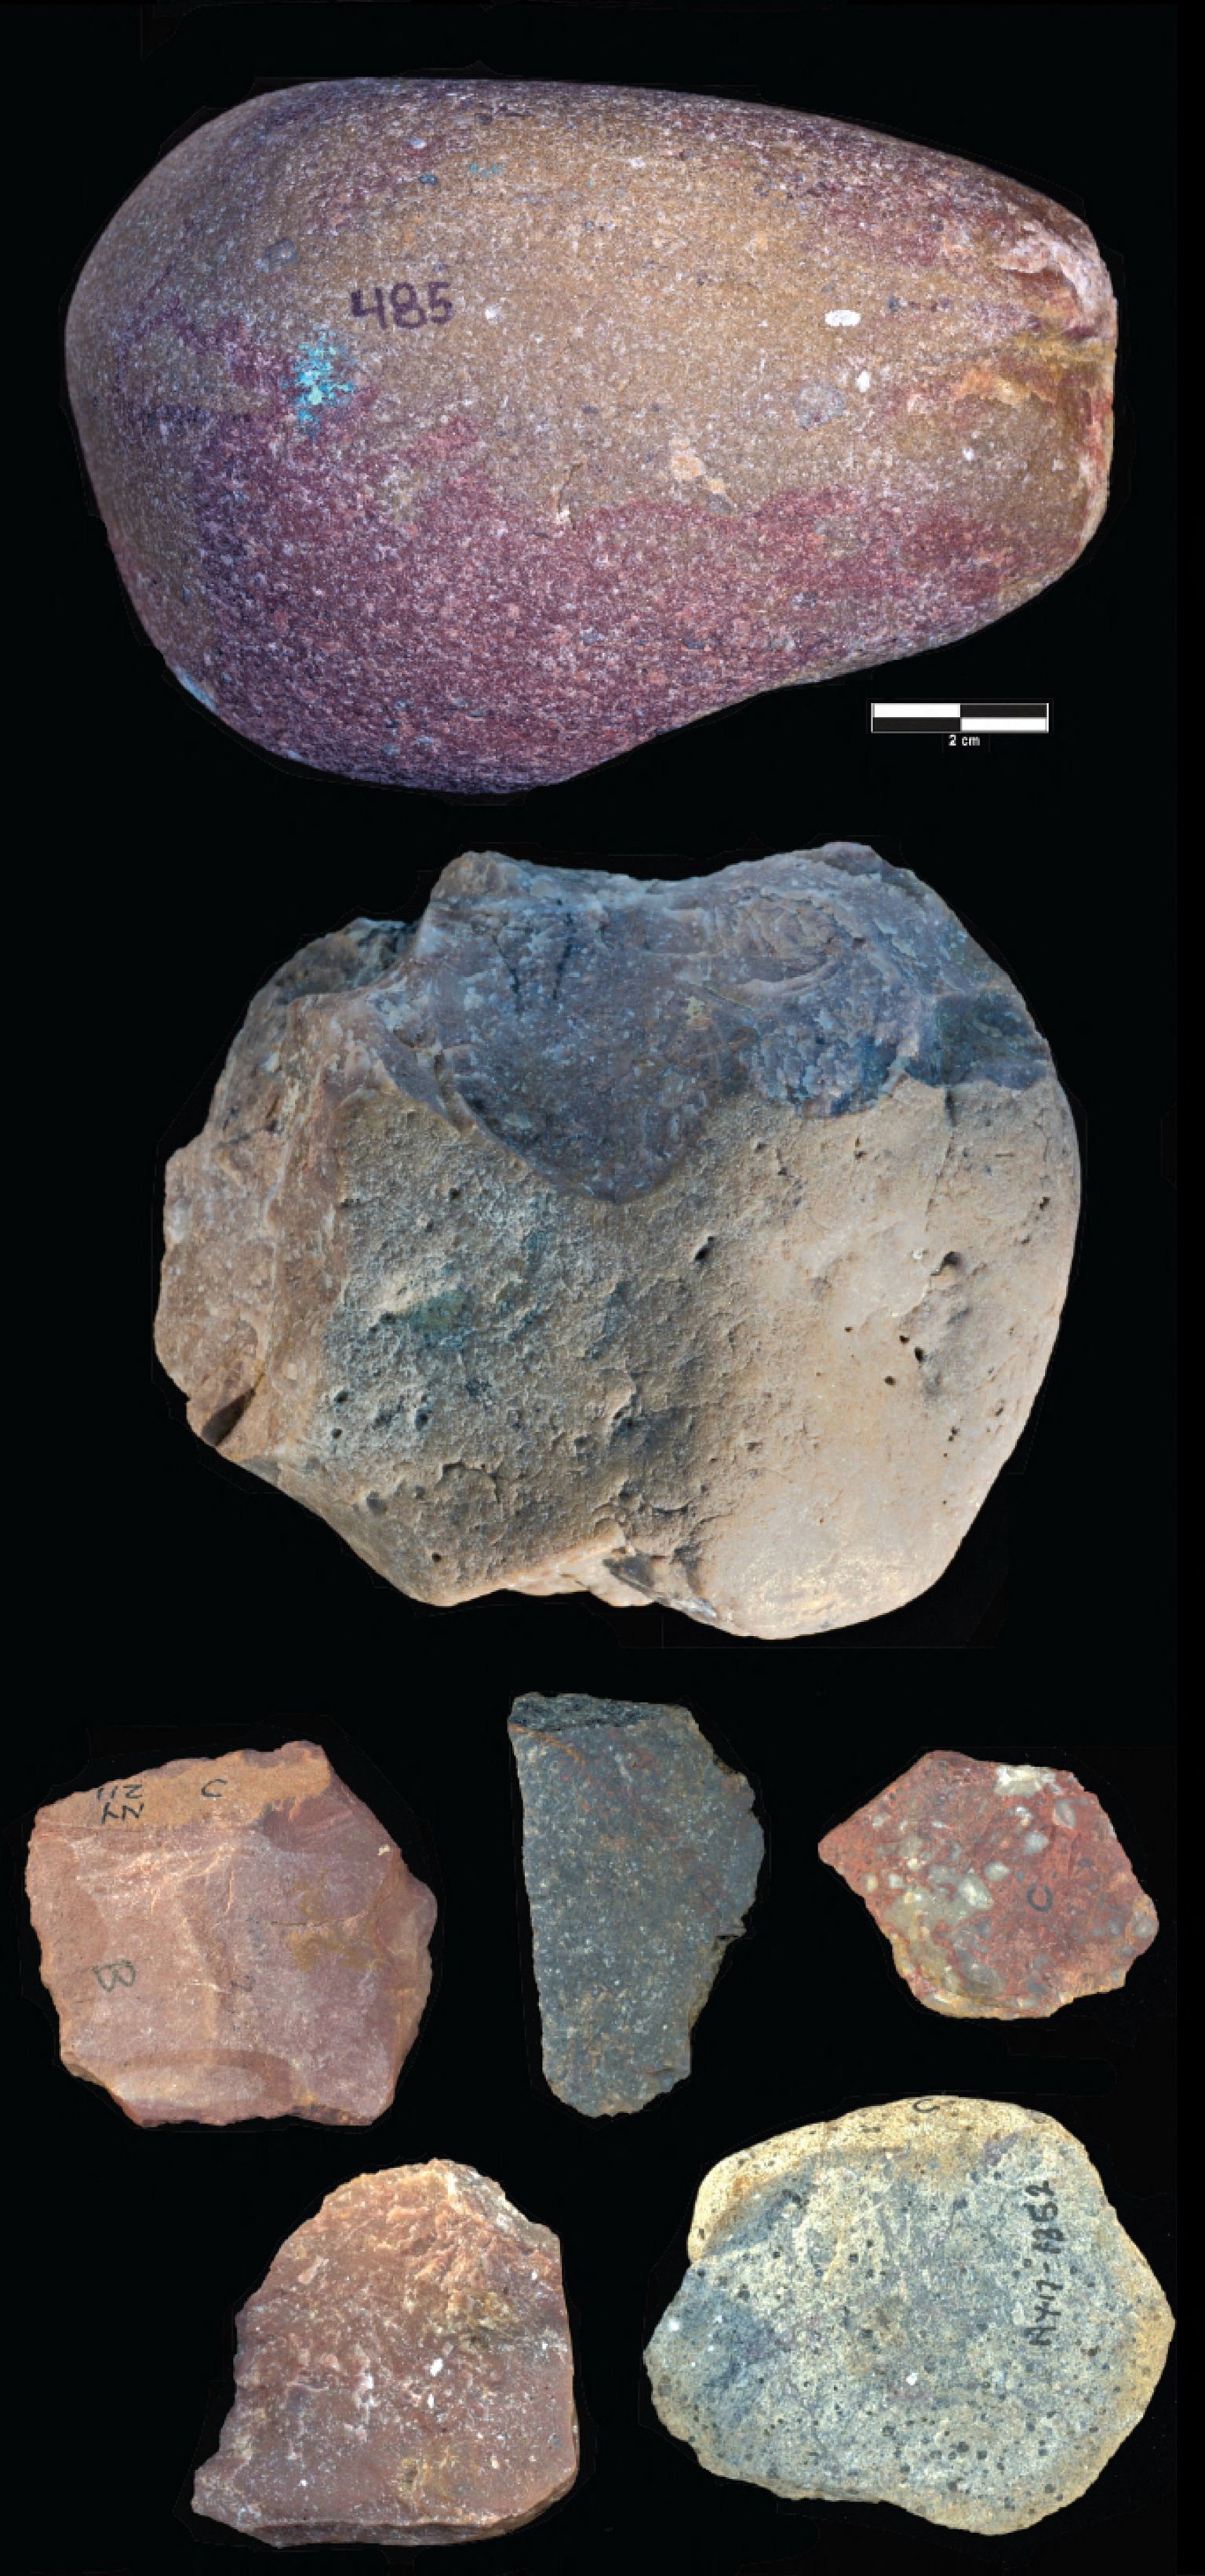 Examples of an Oldowan percussive tool, core and flakes dating from roughly 2.9 million years ago and found at the Nyayanga site in Kenya are seen in this undated handout image. (Top row) Percussive tool found in 2016. (Second row from top) Oldowan core found in 2017. (Bottom rows) Oldowan flakes found in 2016 and 2017. The analysis of wear patterns on 30 of the stone tools found at the site showed that they had been used to cut, scrape and pound both animals and plants.